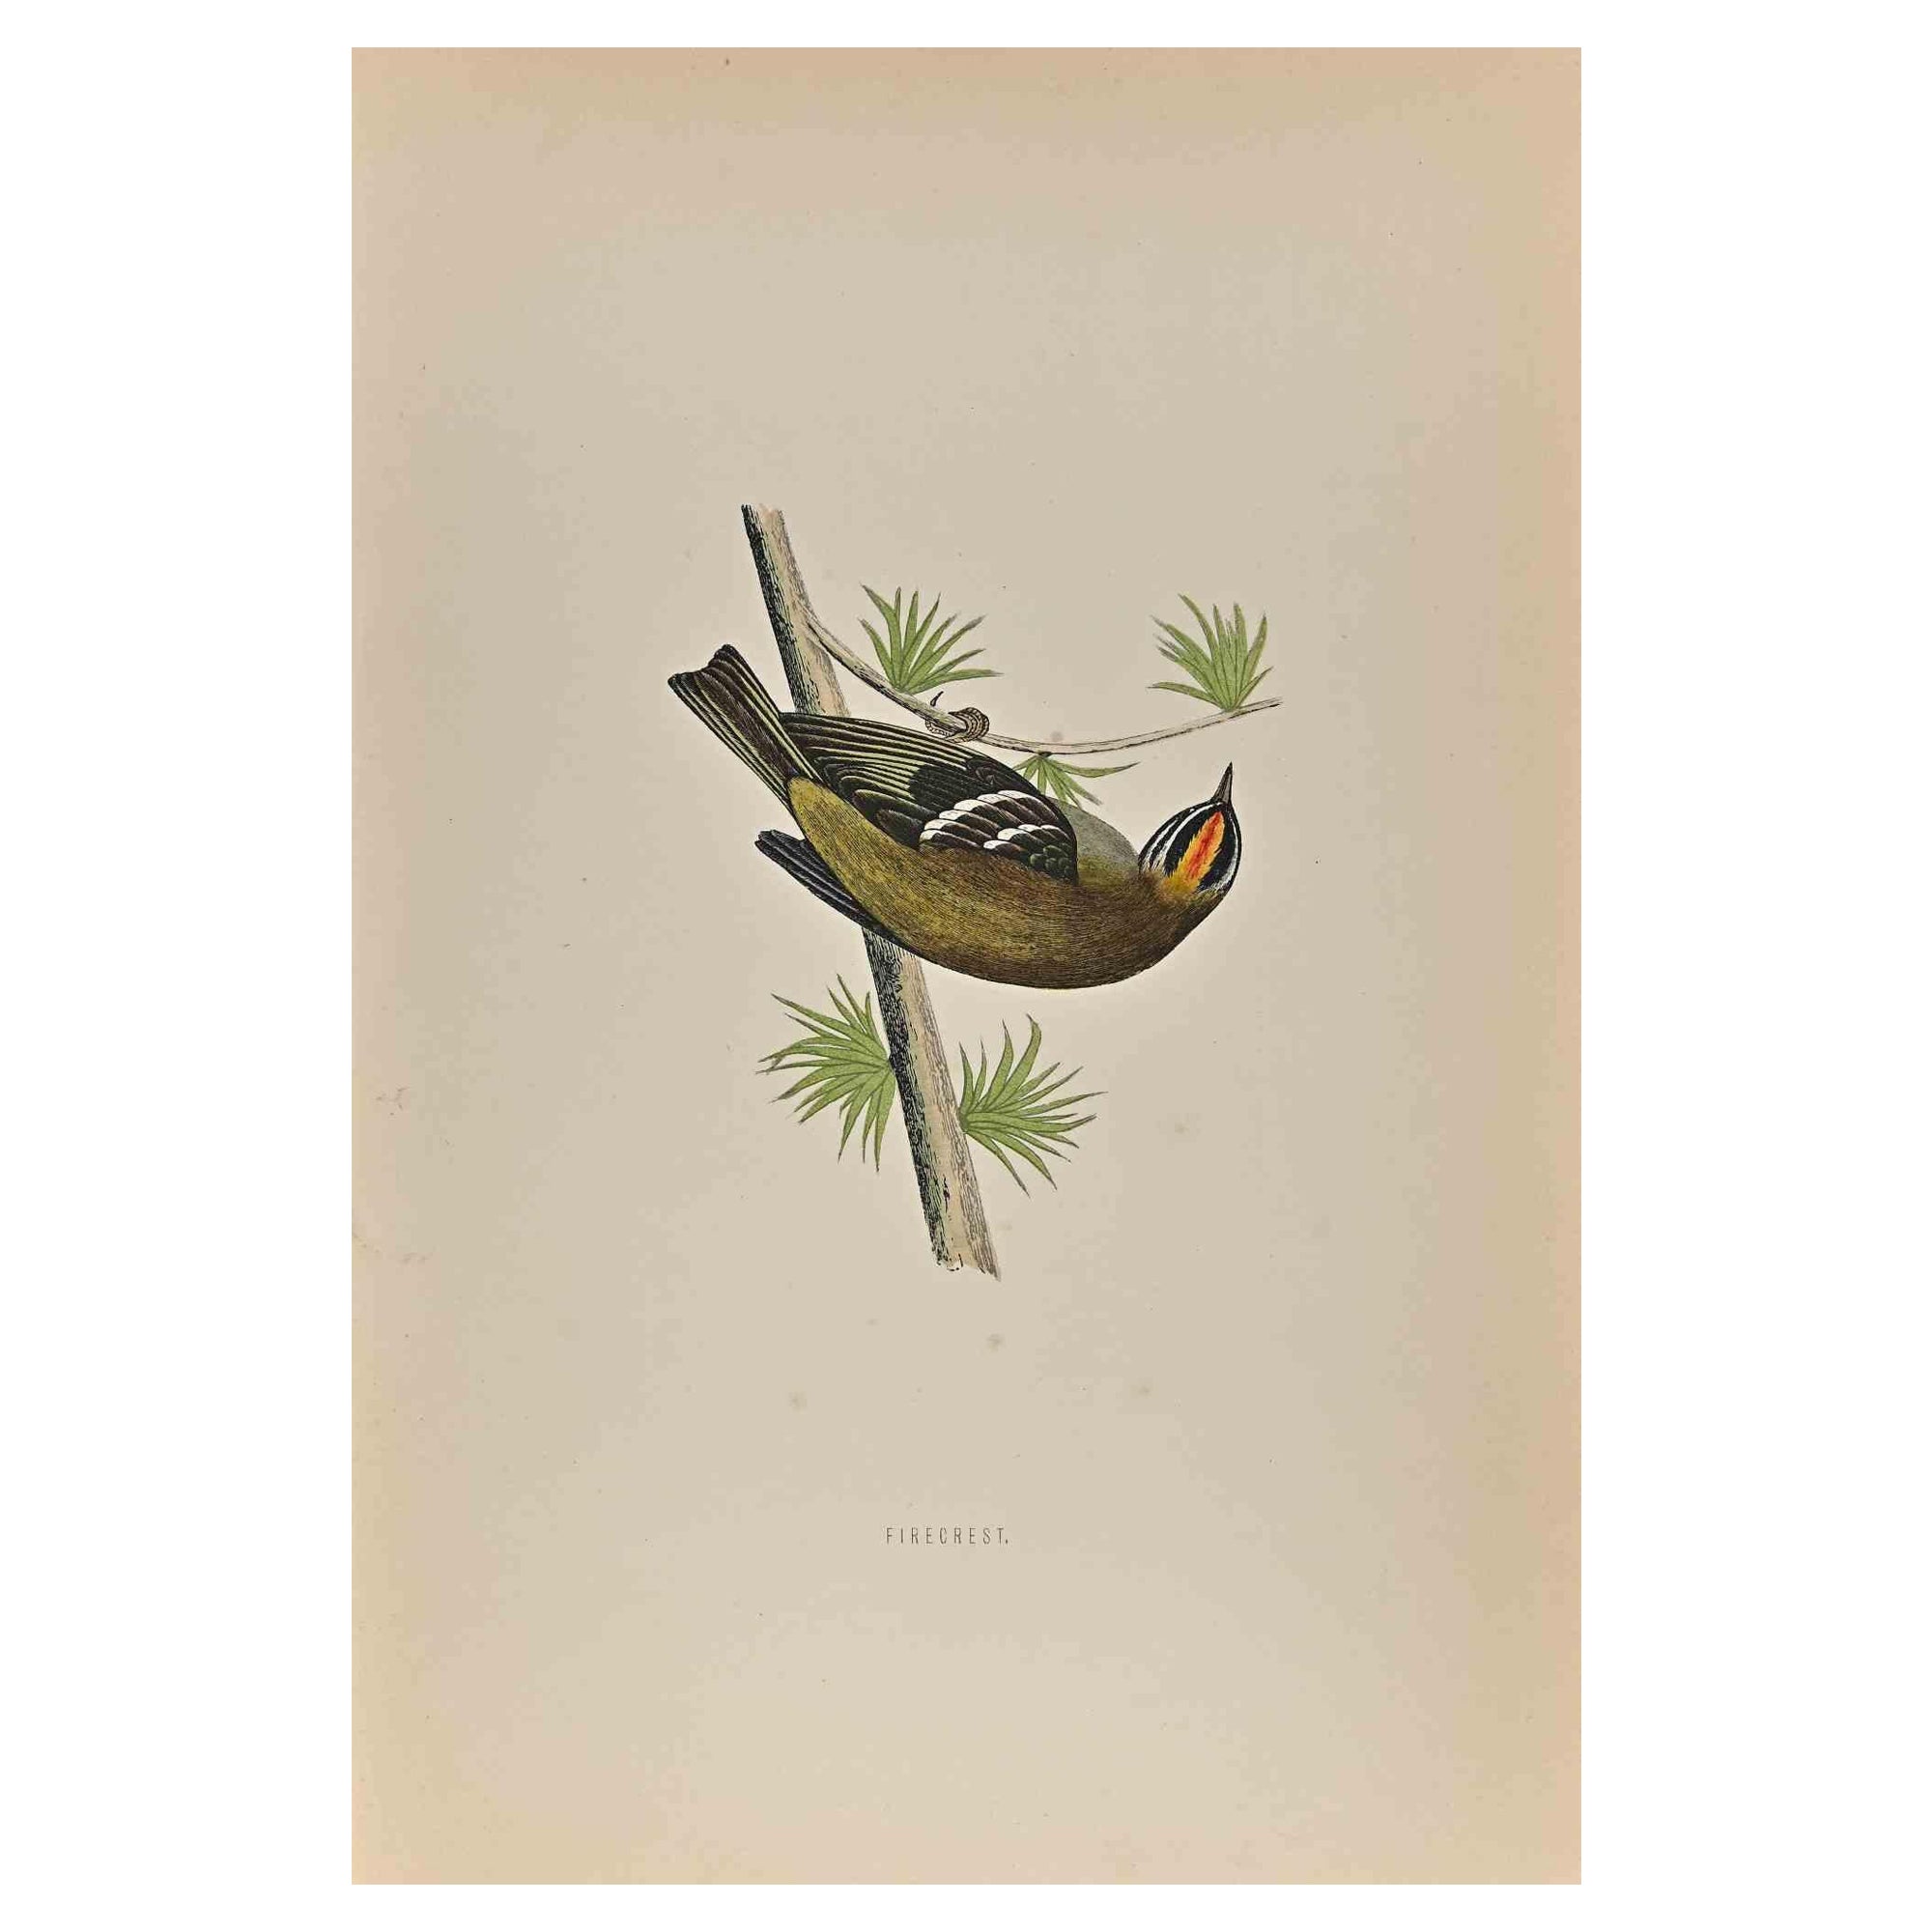 Firecrest is a modern artwork realized in 1870 by the British artist Alexander Francis Lydon (1836-1917) . 

Woodcut print, hand colored, published by London, Bell & Sons, 1870.  Name of the bird printed in plate. This work is part of a print suite